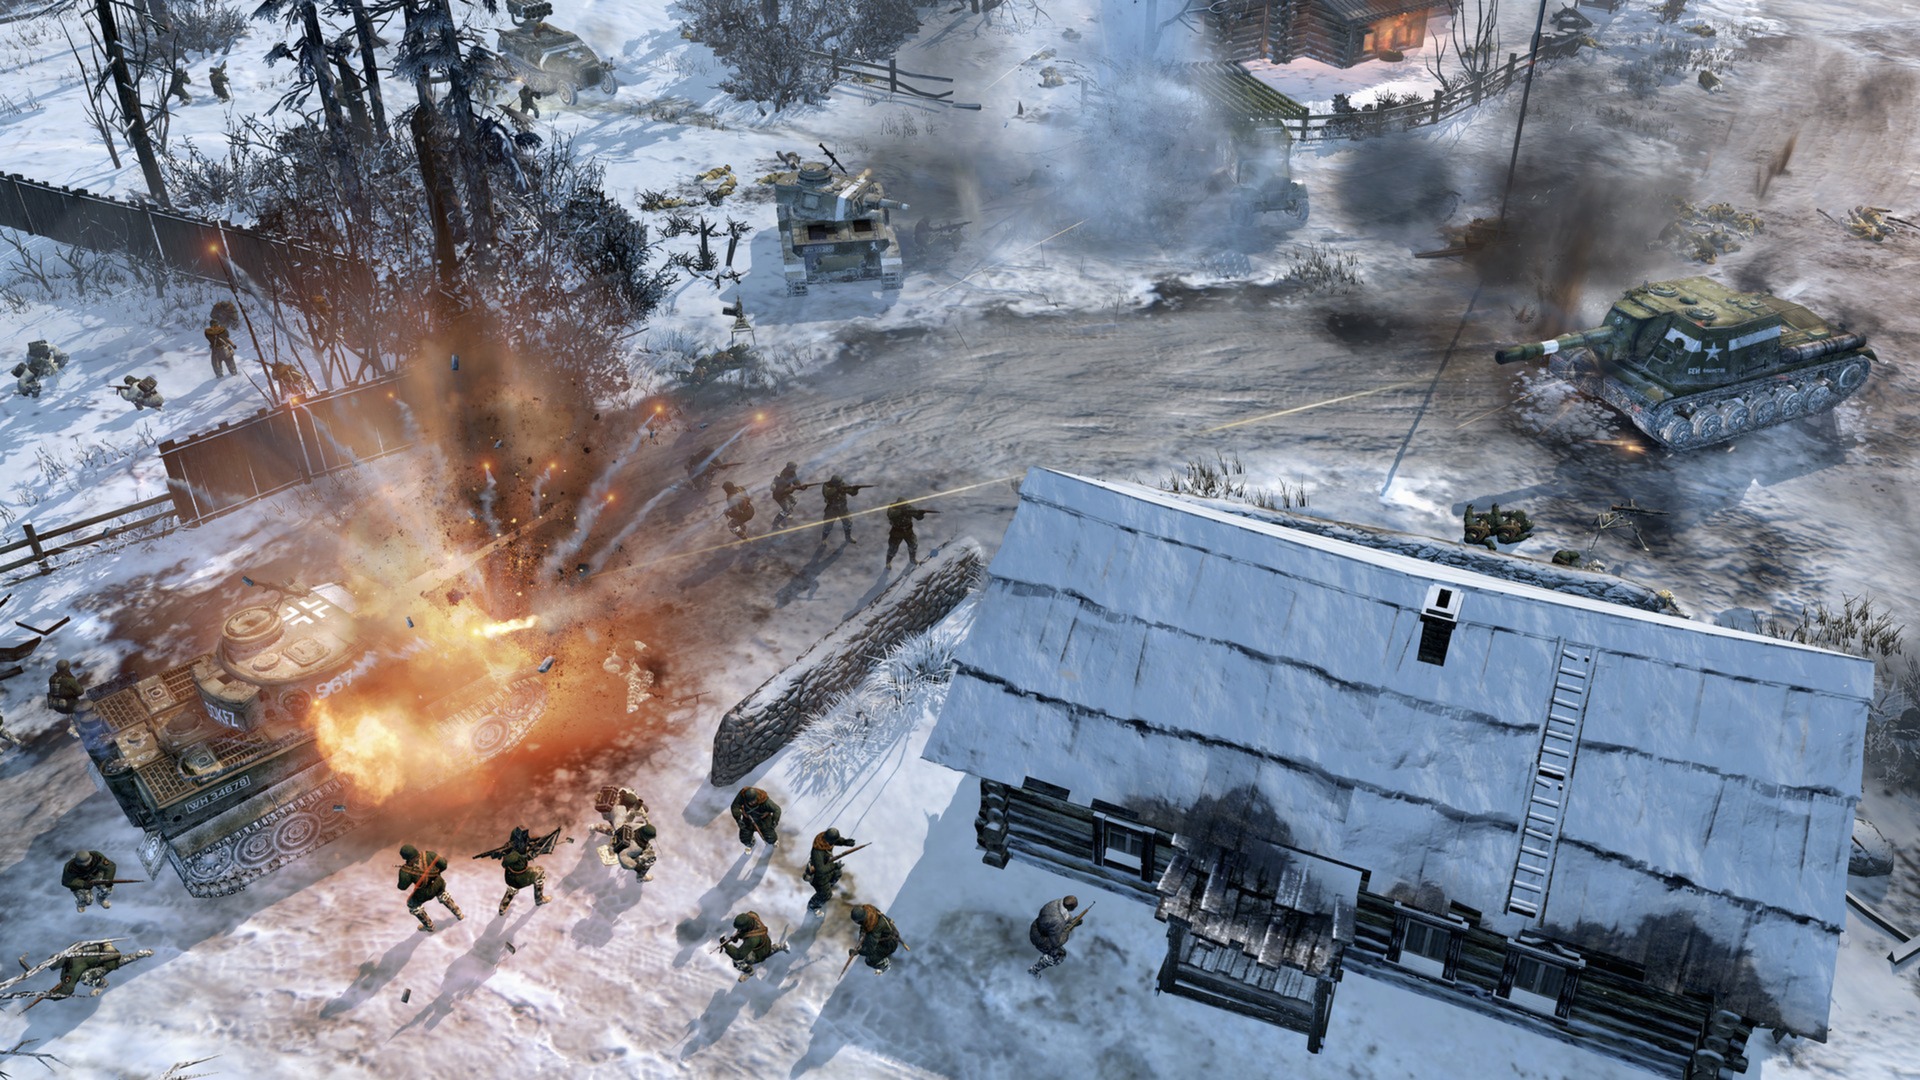 Company of heroes 2 skirmish offline patch notes